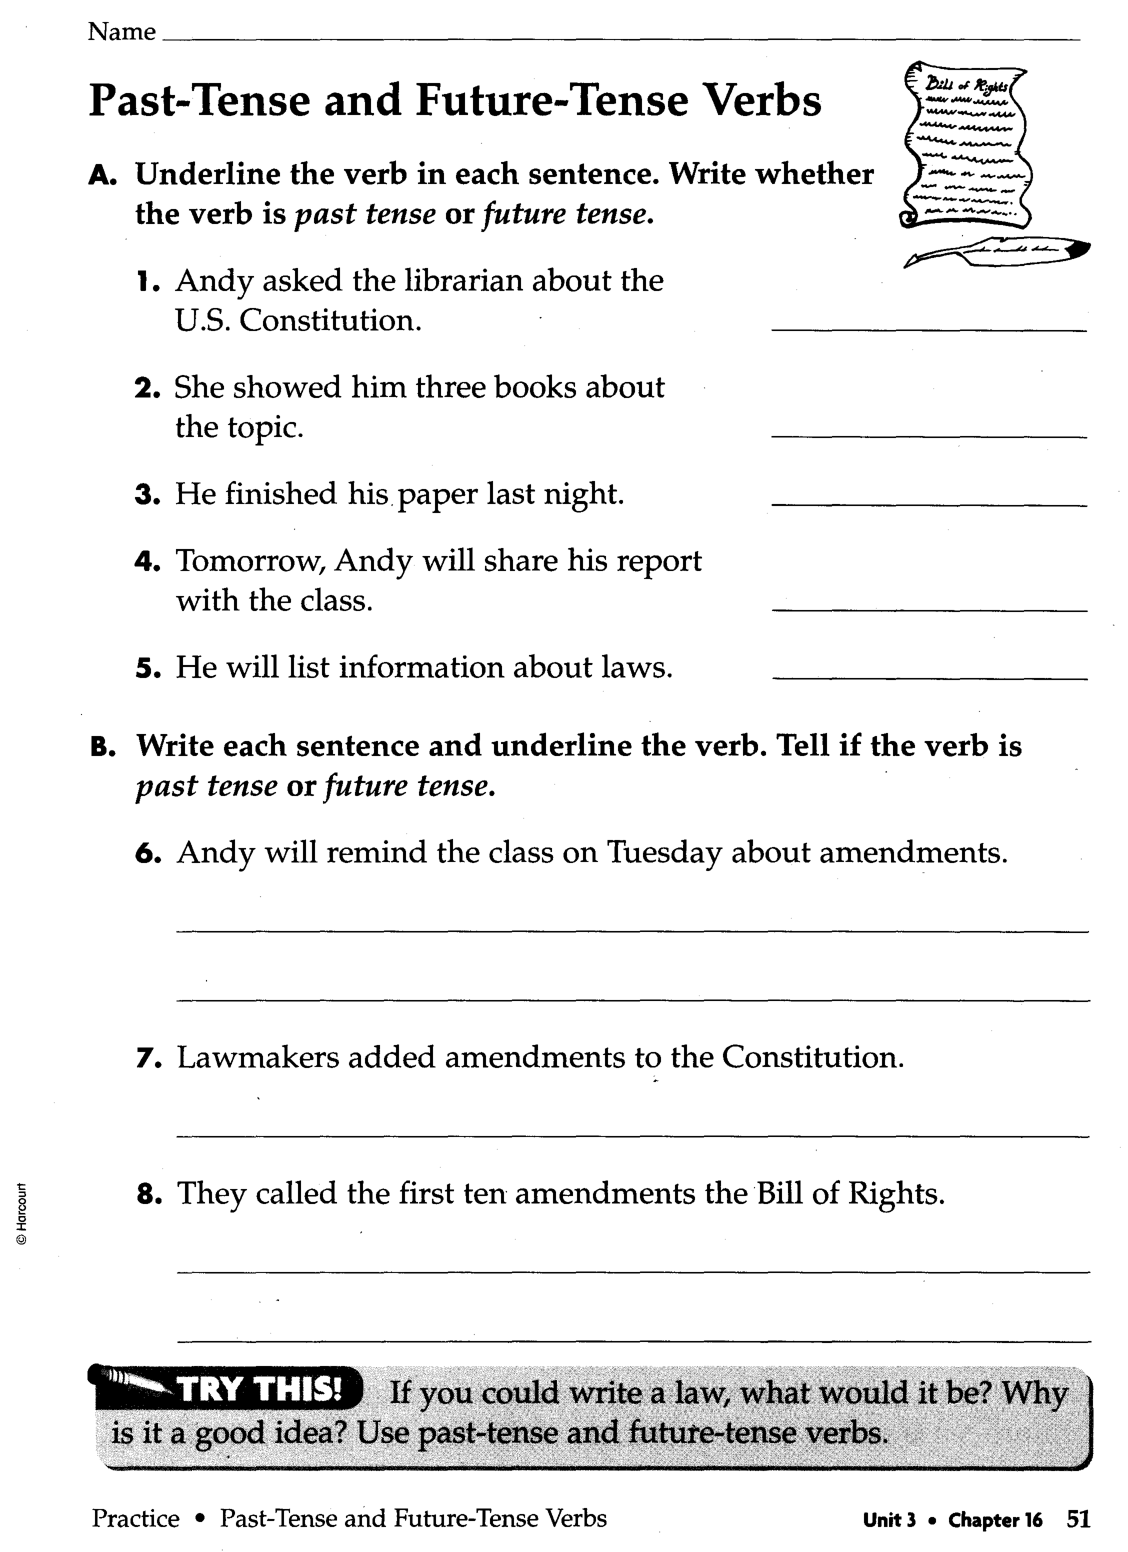 18 Best Images Of Past And Future Tenses Worksheets Past Present Future Verbs Worksheet Past